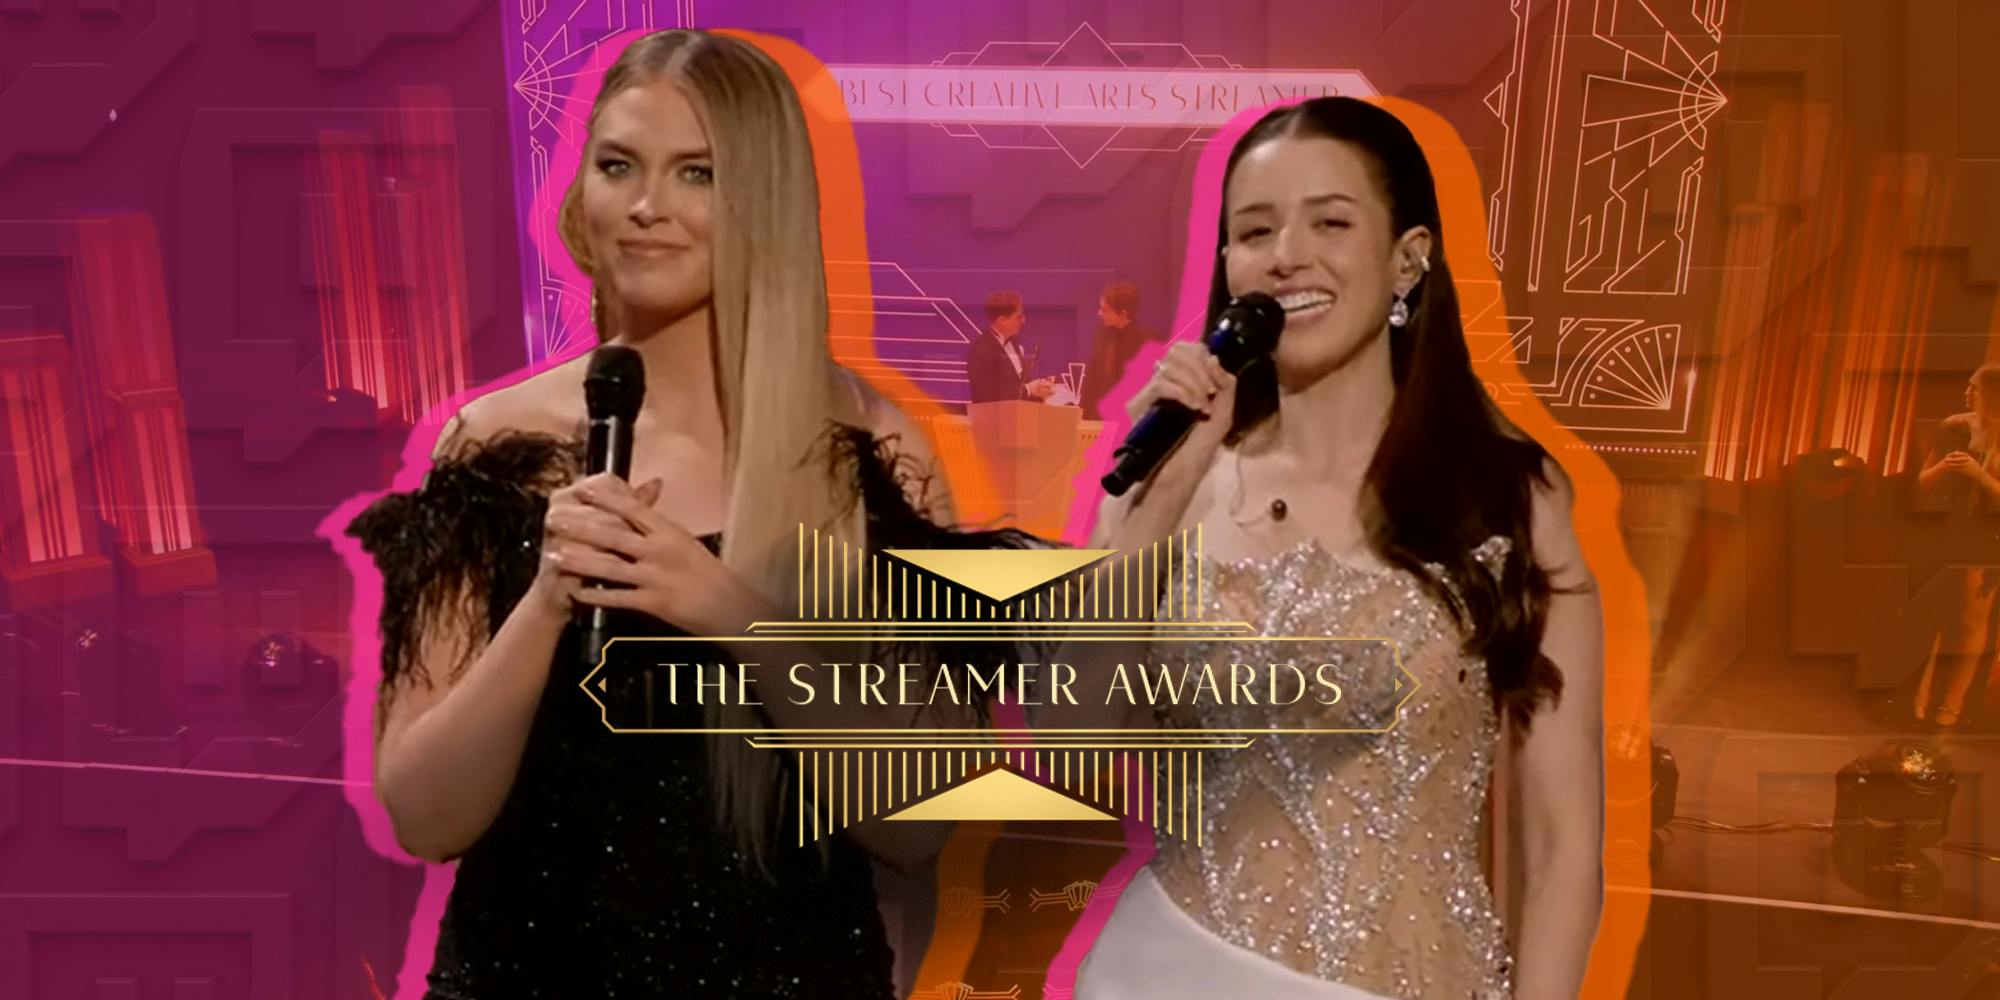 The Streamer Awards Made Me Feel Too Old for Twitch